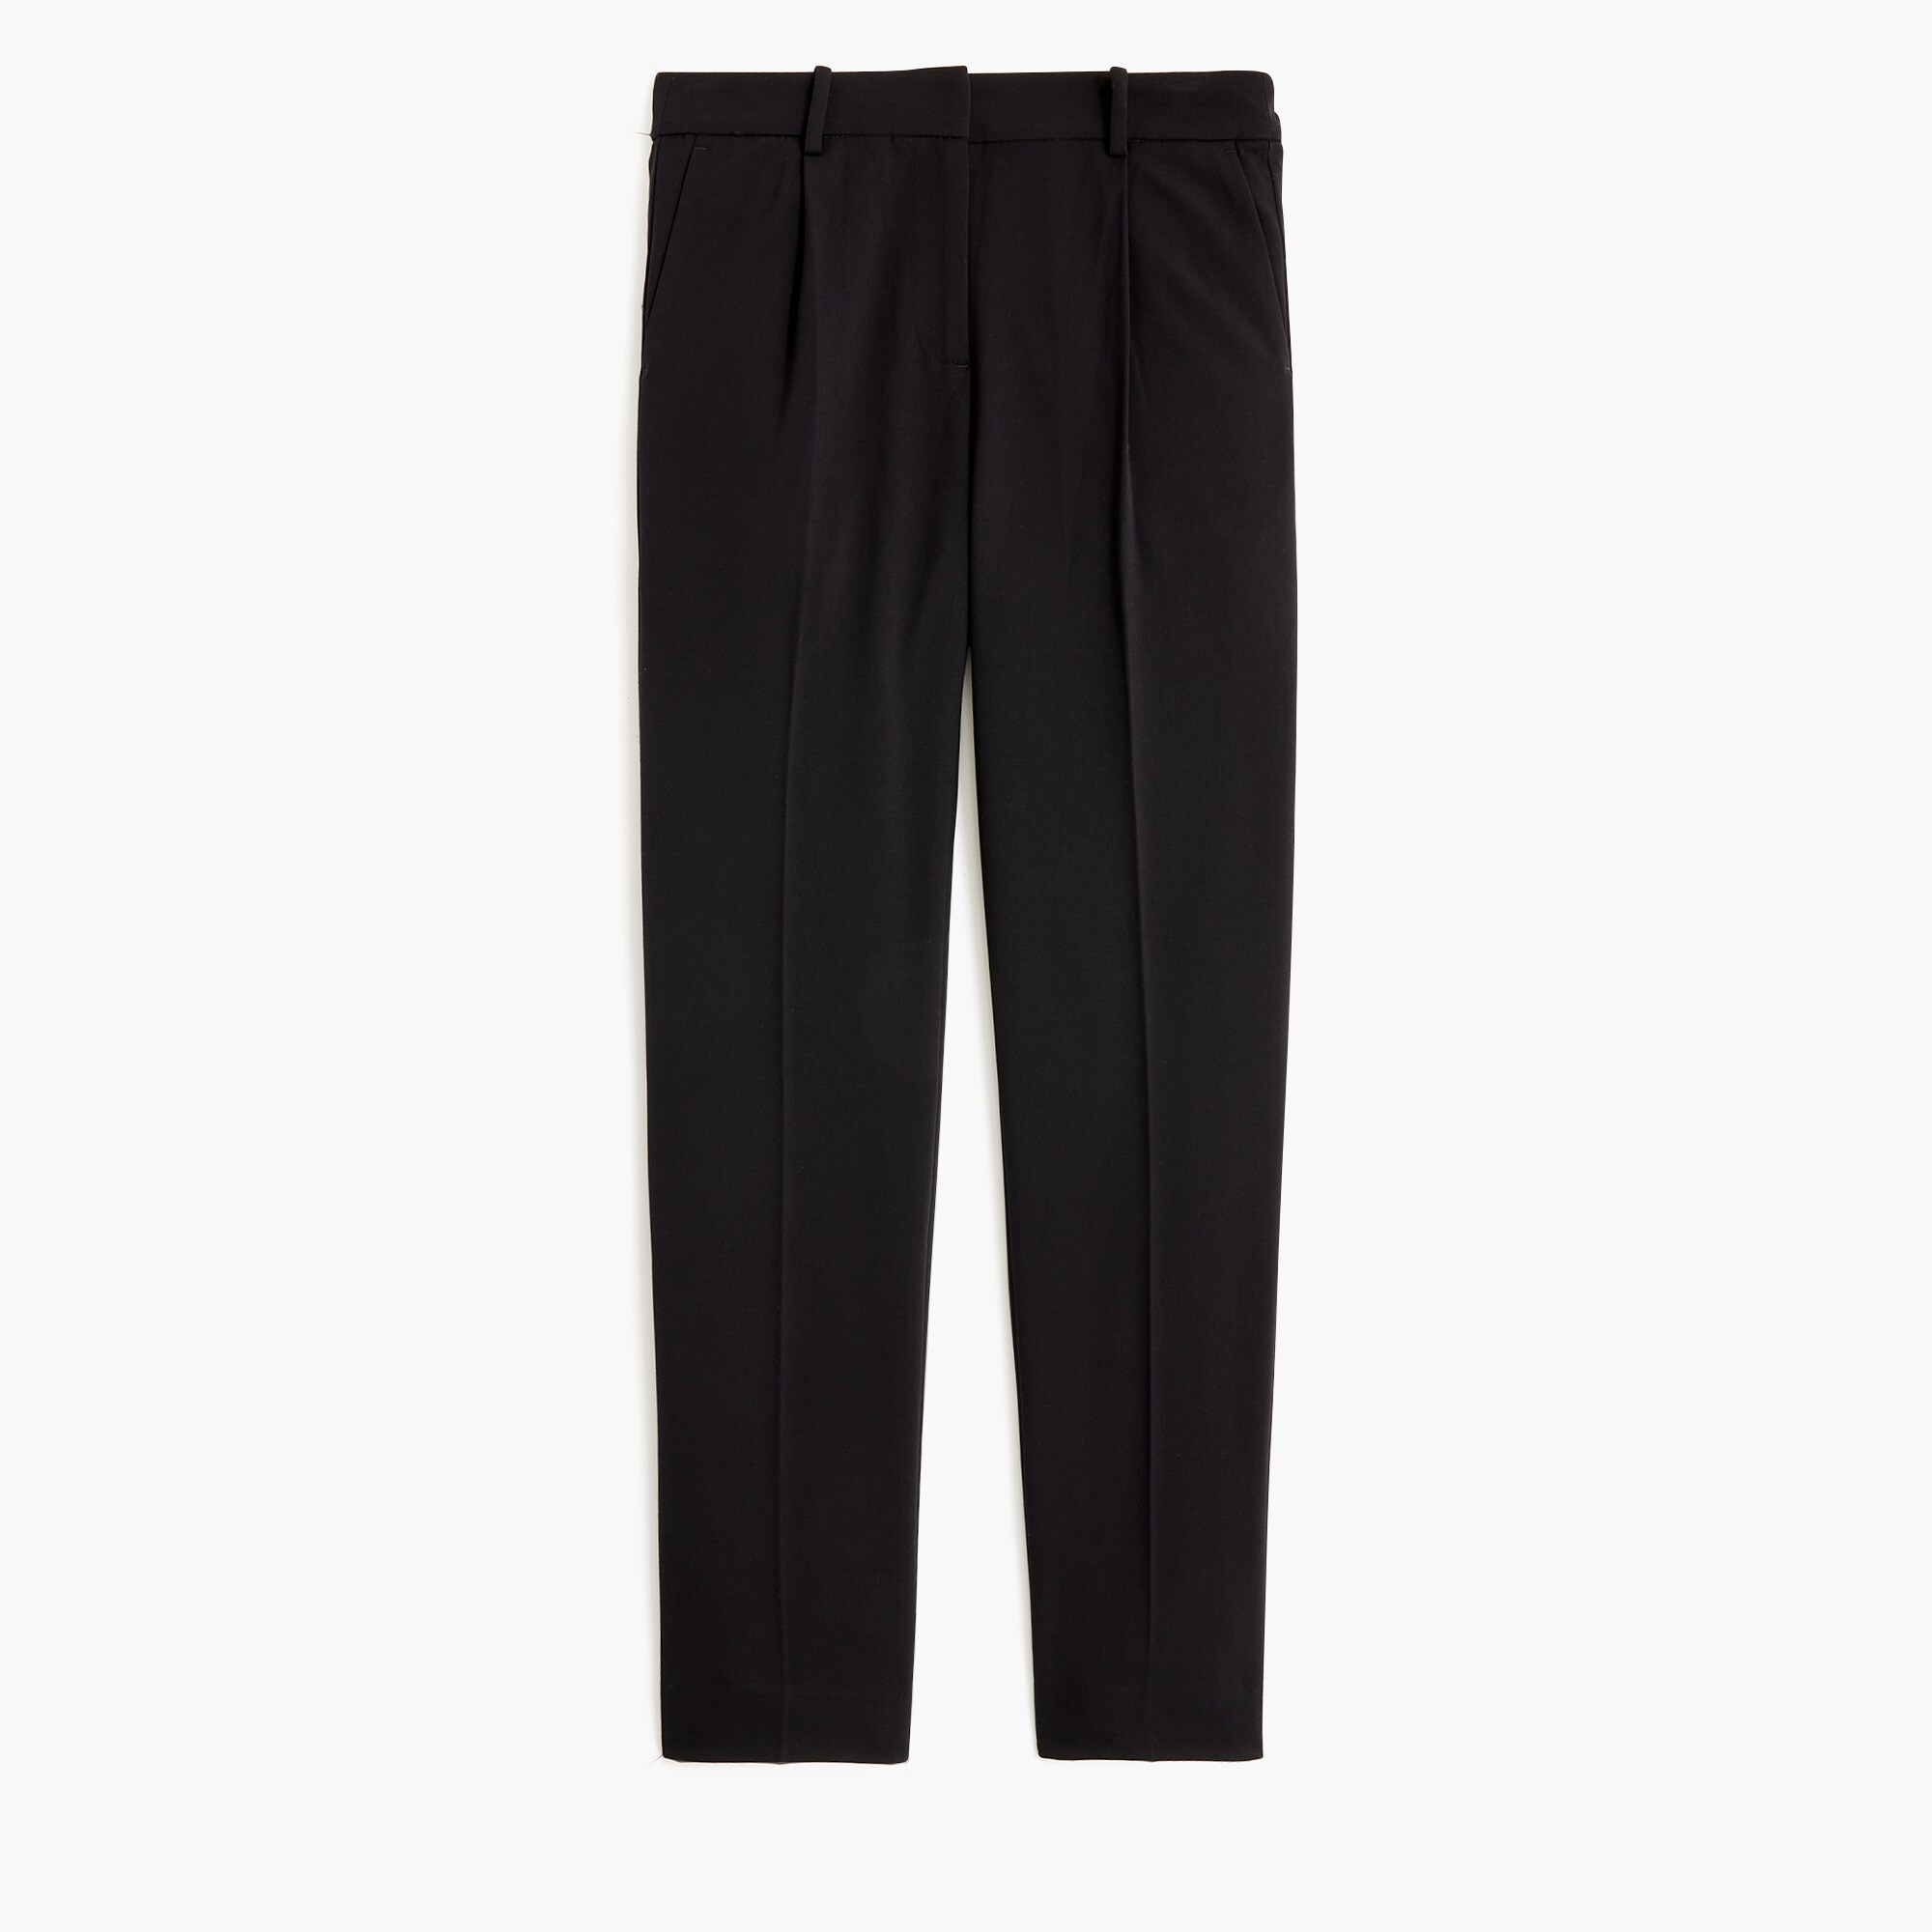  Pleated trouser